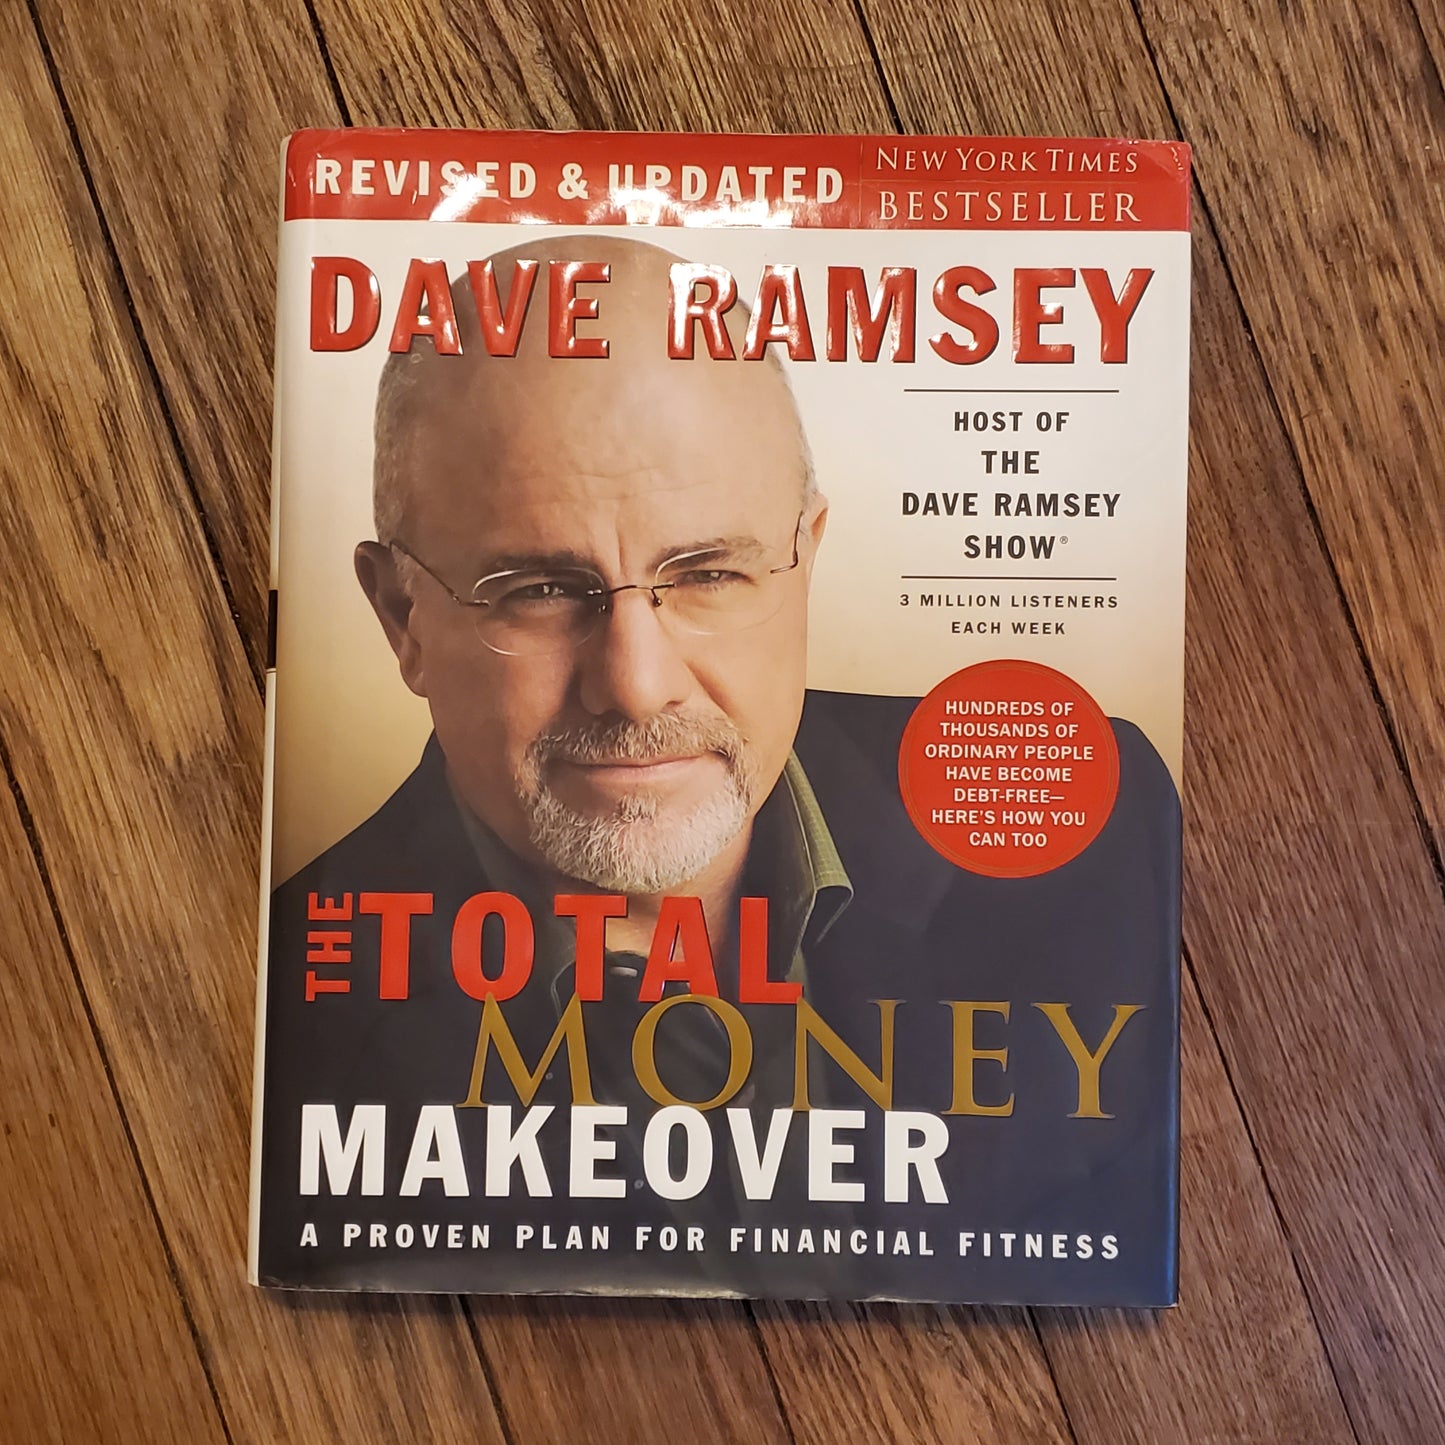 GB Used Dave Ramsey